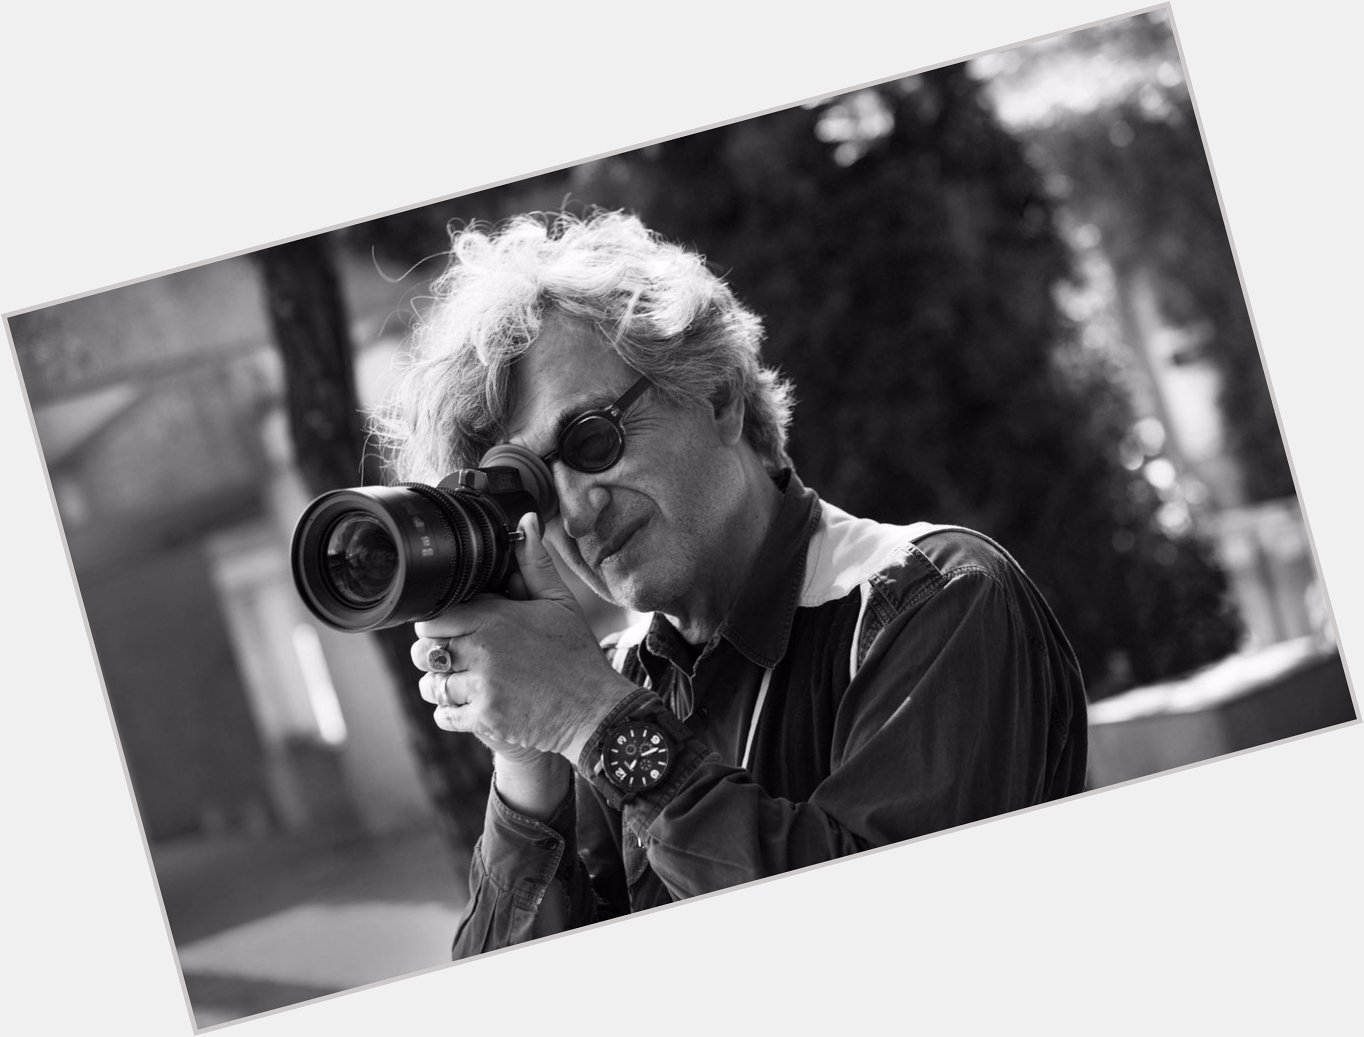 Happy Birthday to Wim Wenders, the director behind Paris, Texas, Wings of Desire, and the American Friend! 